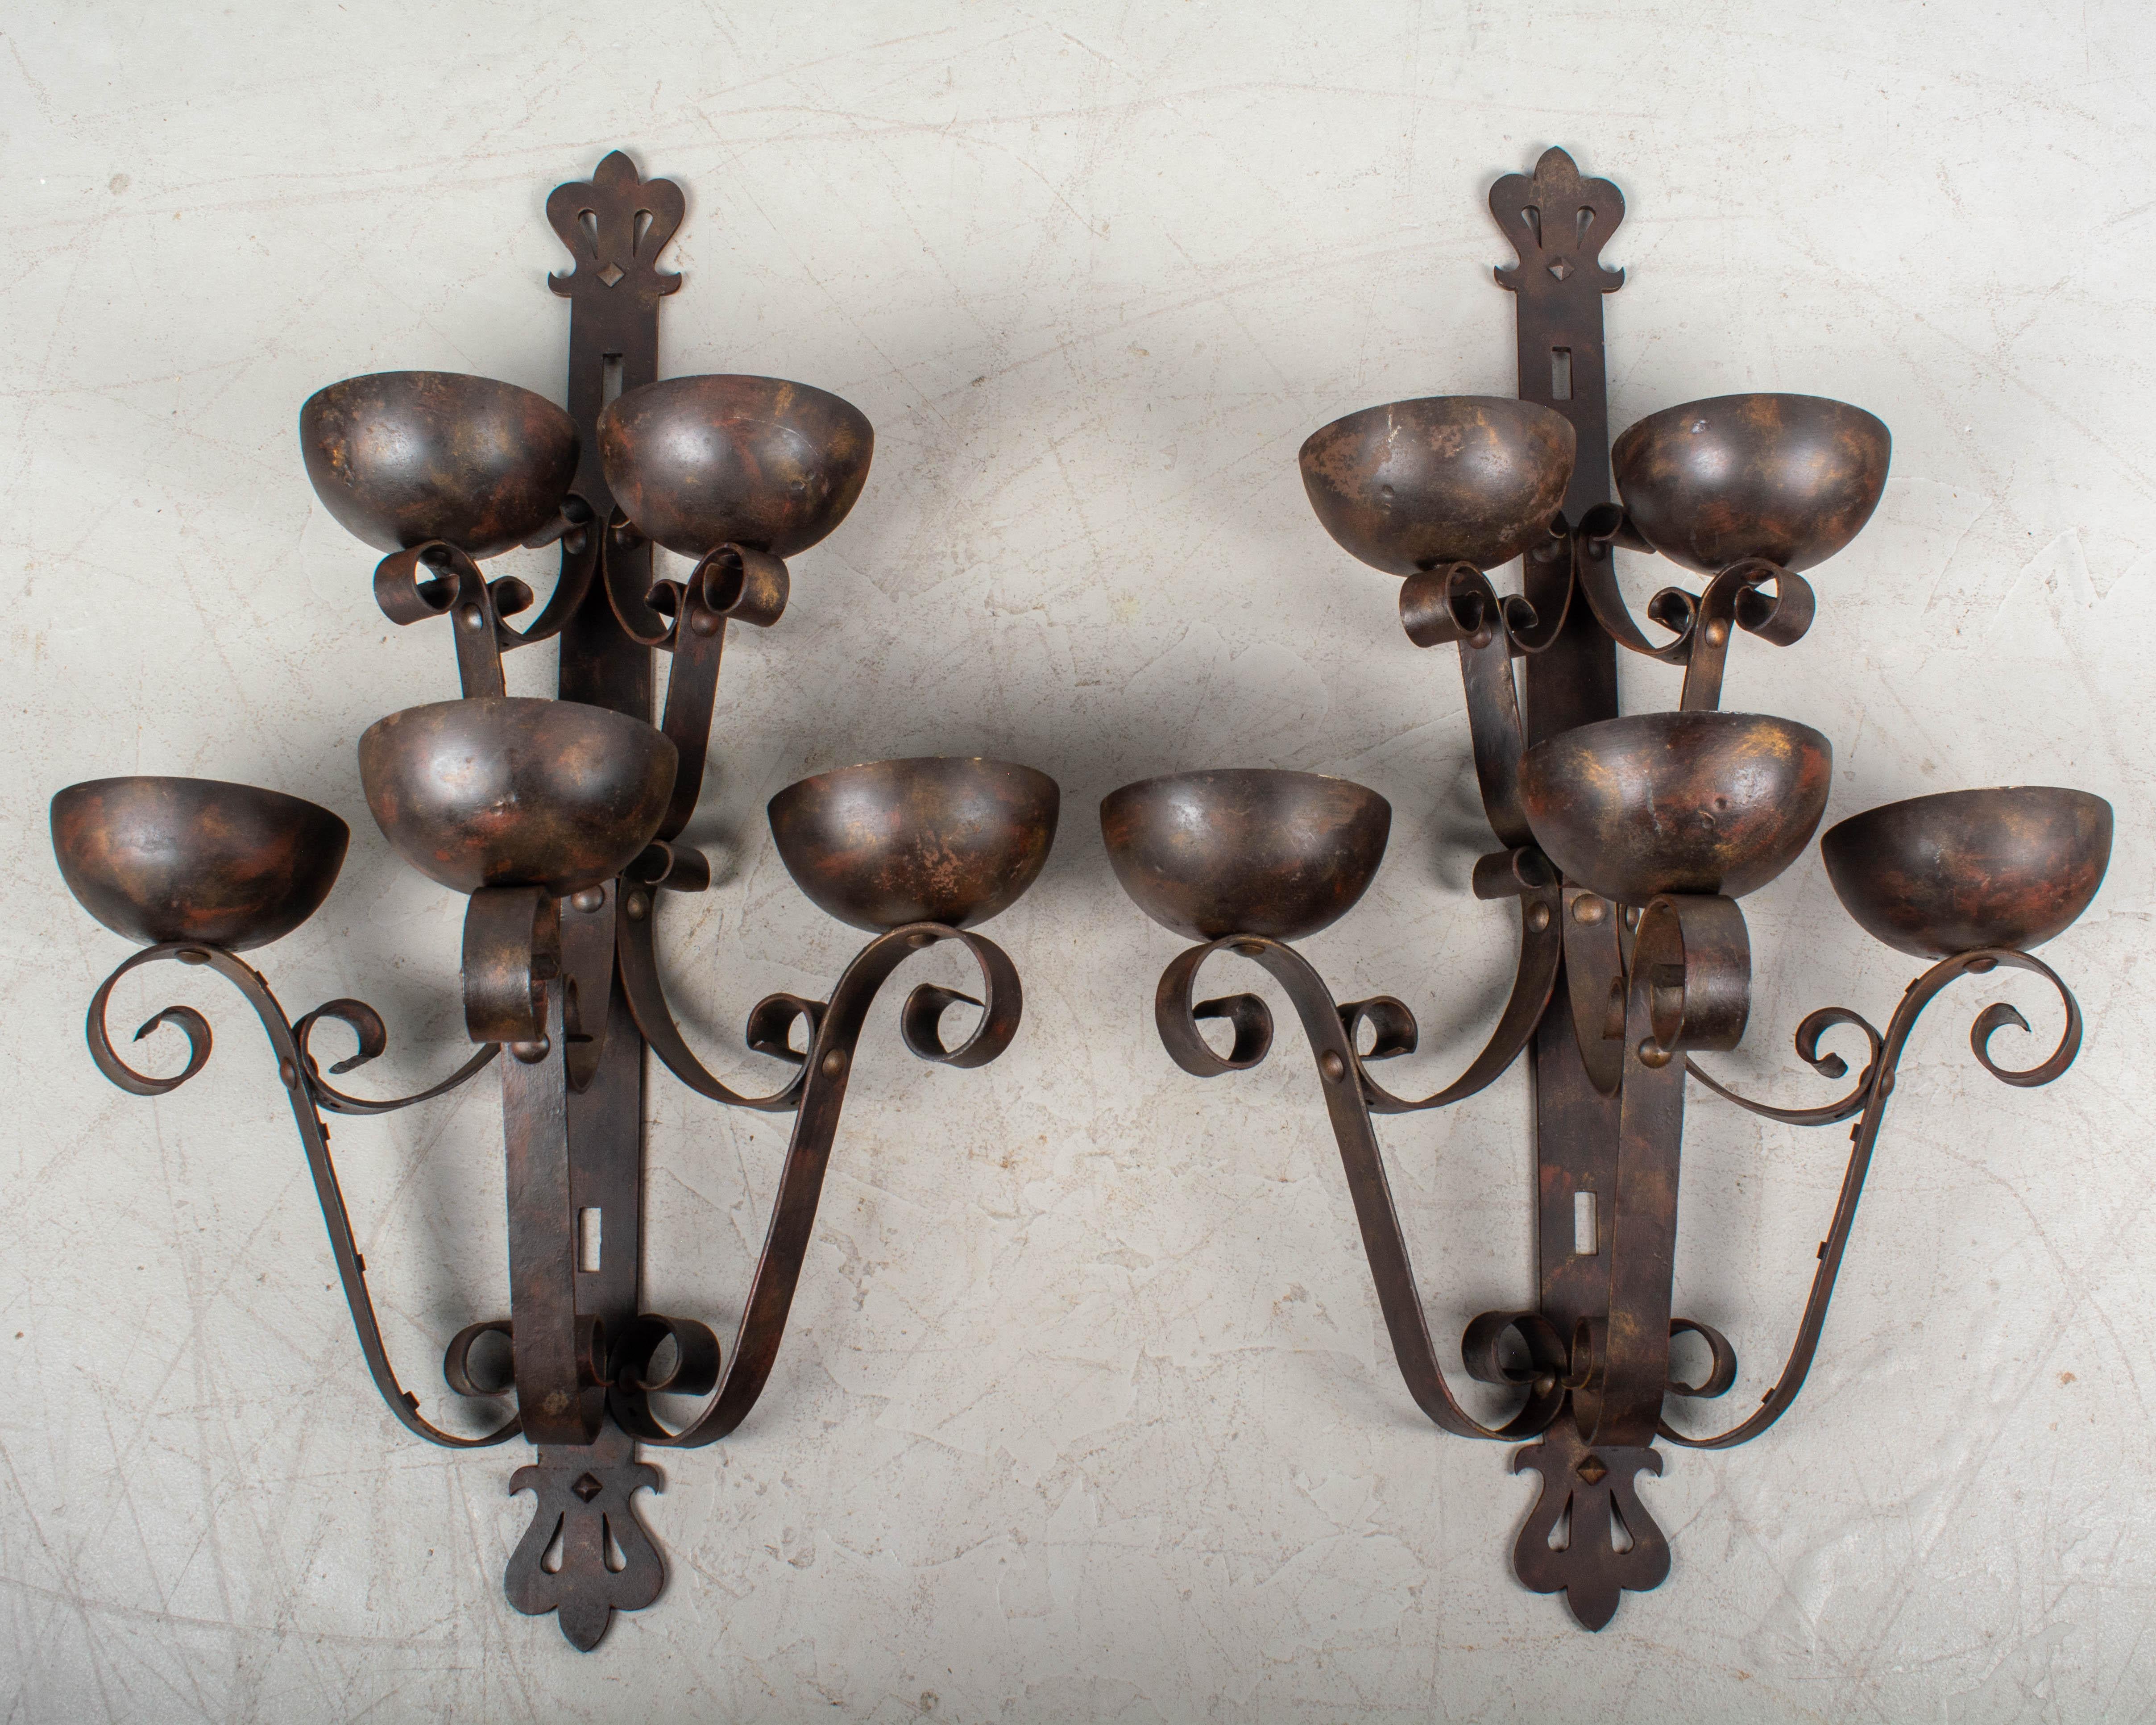 A pair of large Art Deco Spanish Revival style wrought iron architectural sconces with cold-painted finish made to look like bronze. Five half-dome torchiere up-lights create a dramatic effect when lit. Each dome is 7